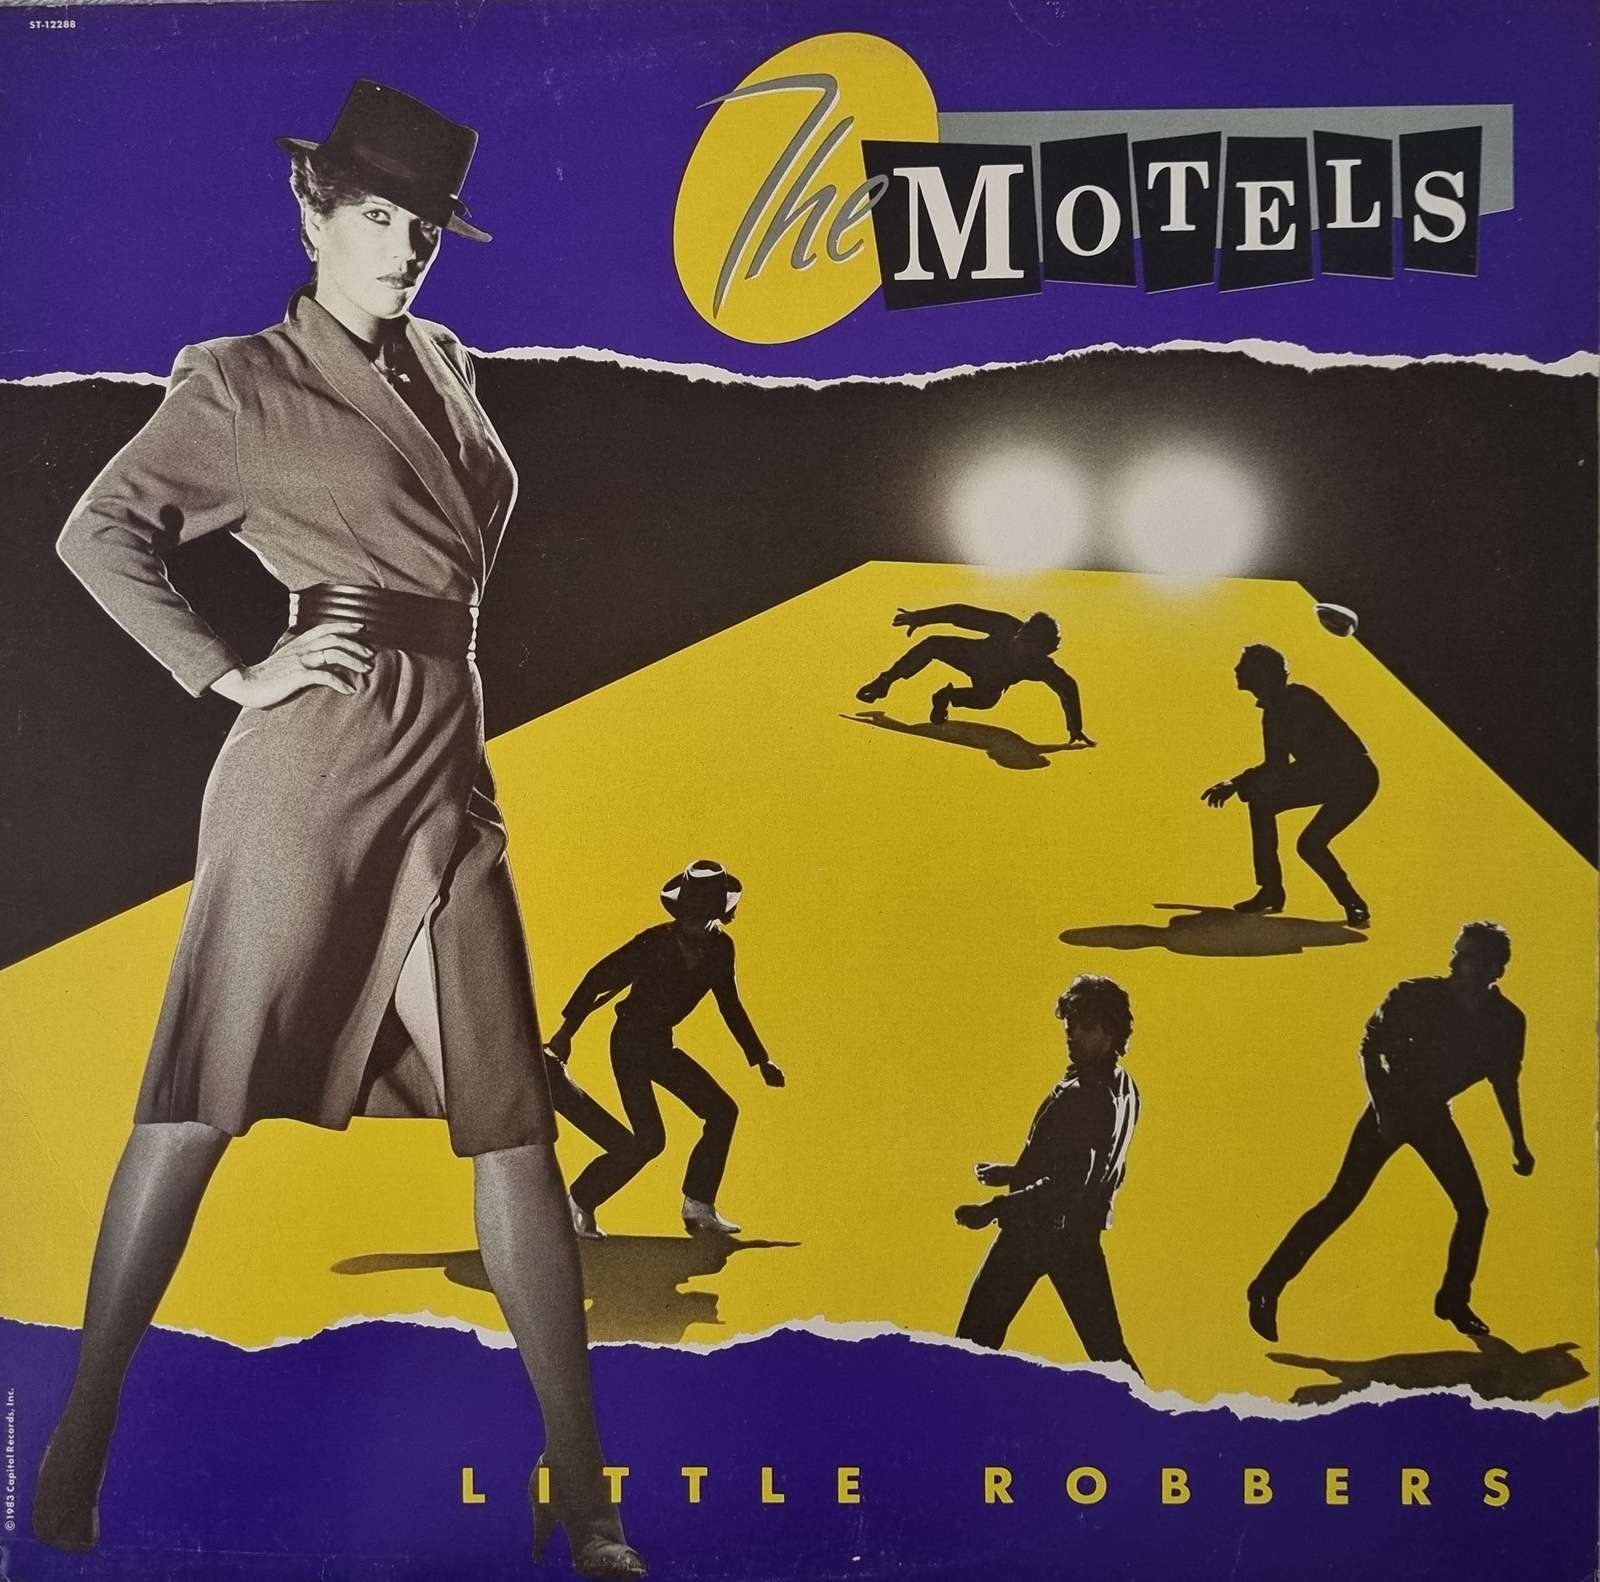 The Motels - Little Robbers (LP)